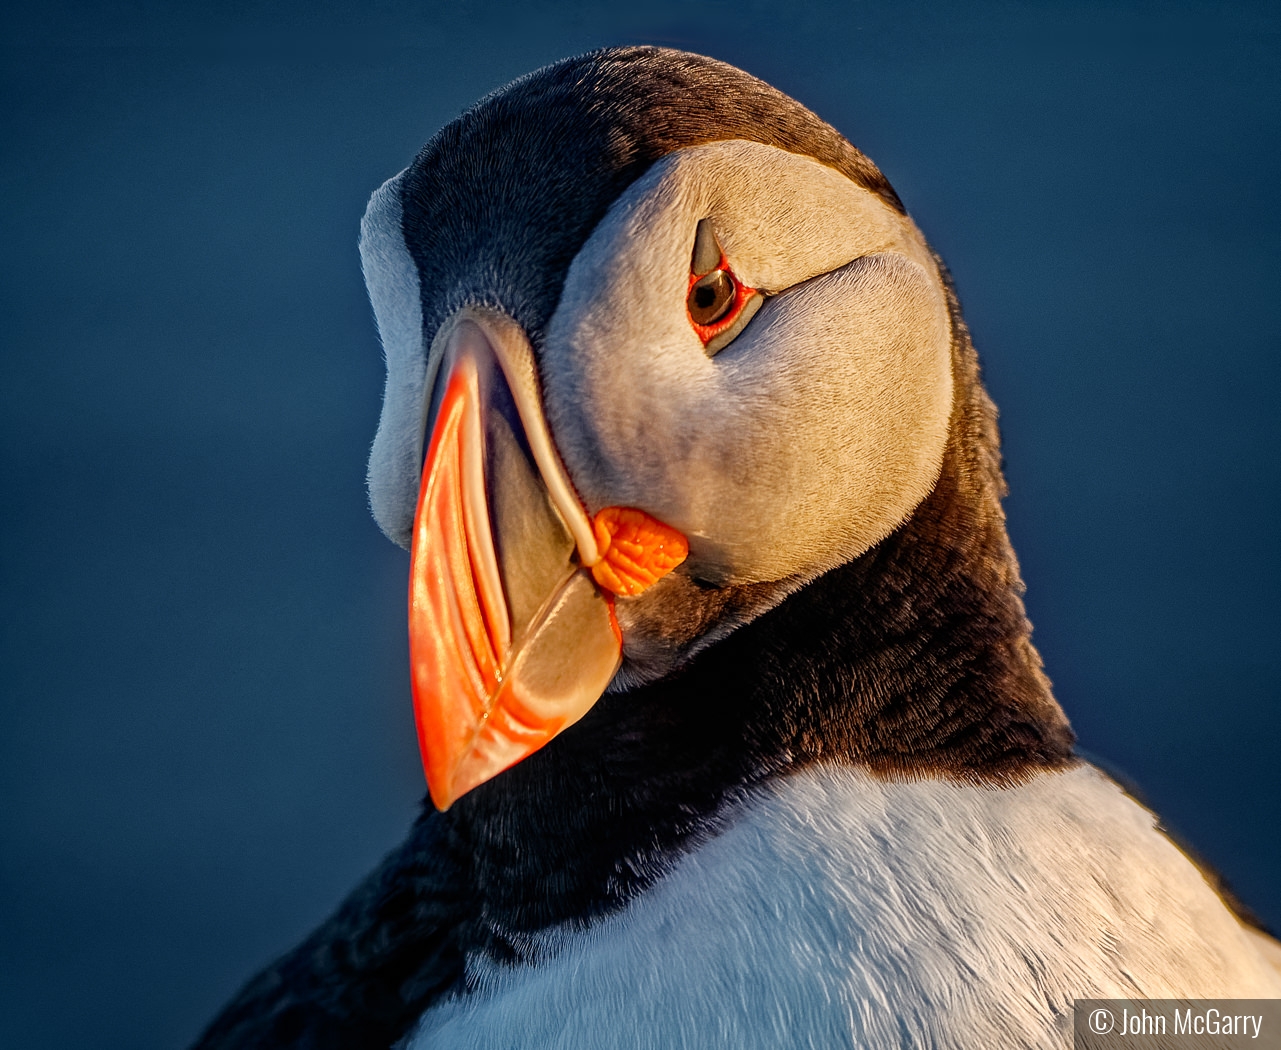 Pretty Puffin by John McGarry